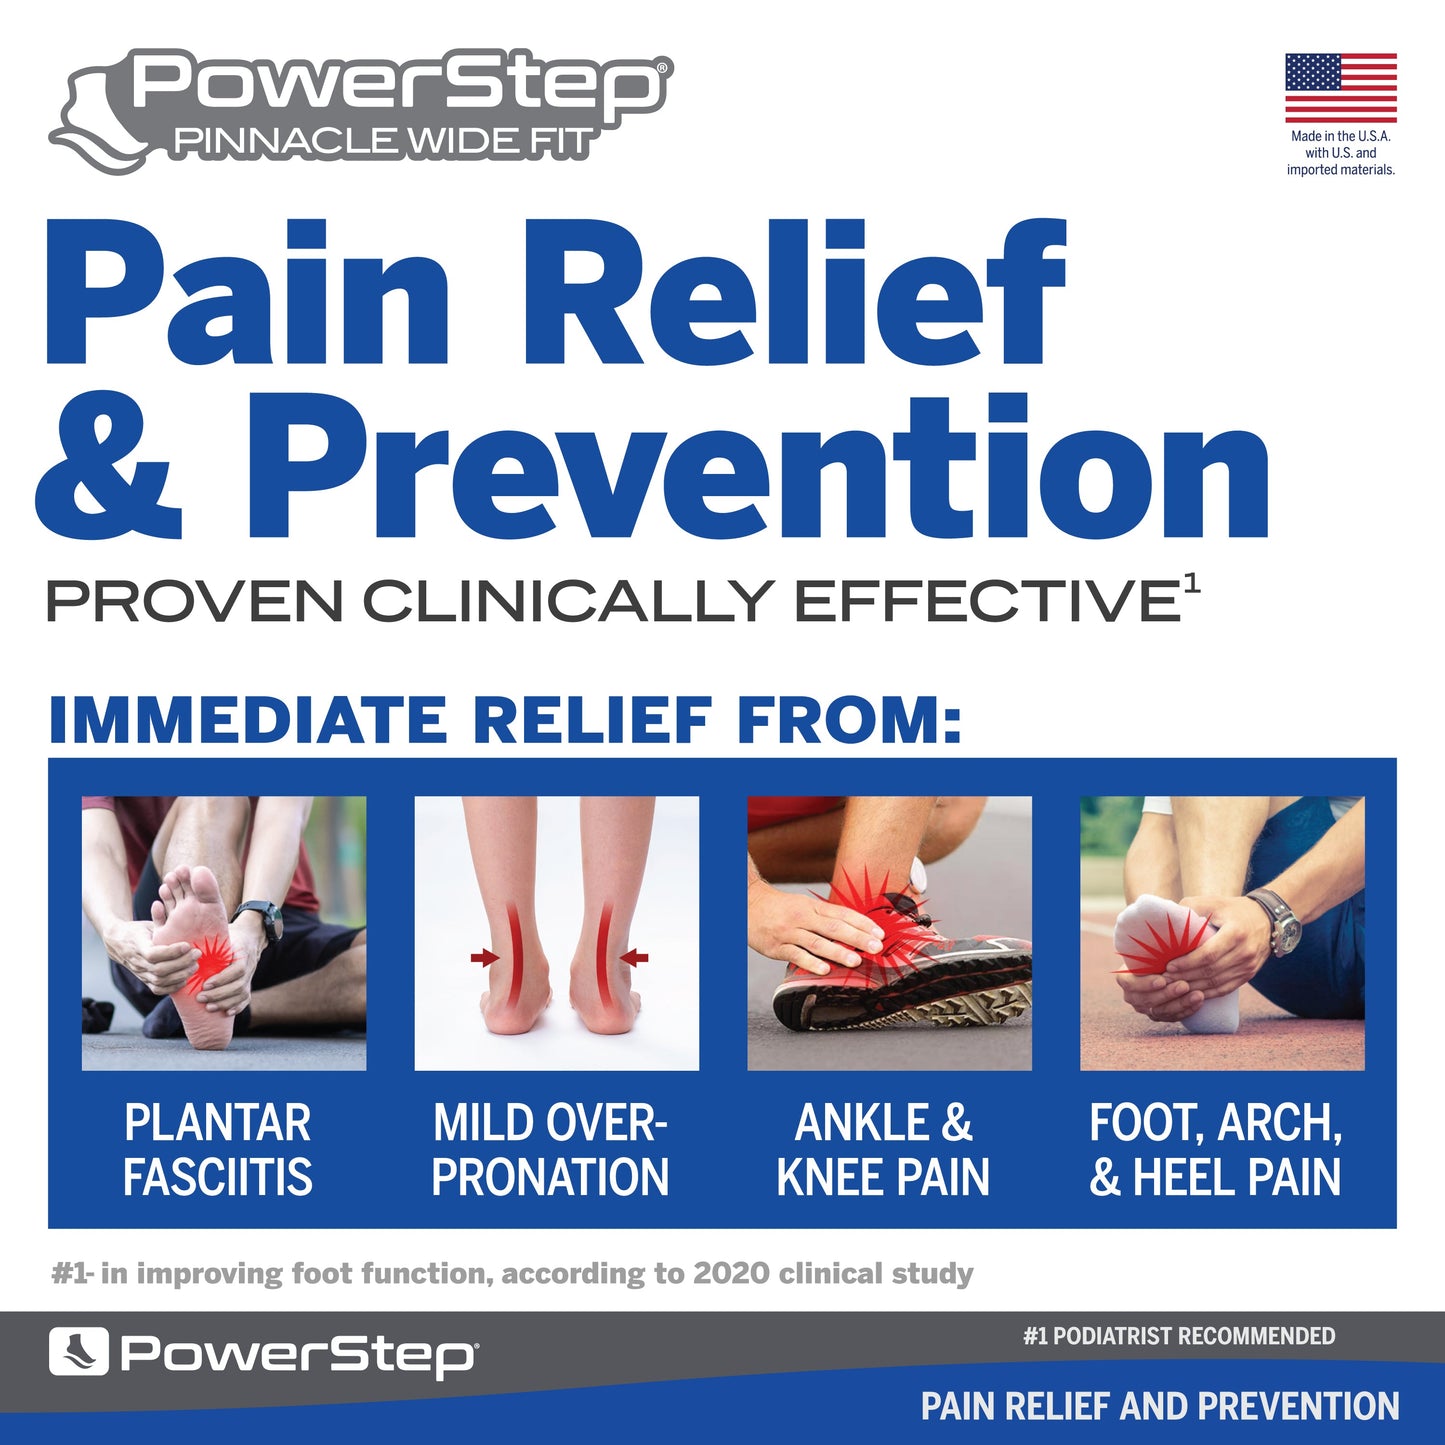 PowerStep Pinnacle Wide Fit Orthotic Shoe Insoles, Made in the USA with US and imported materials, pain relief and prevention, proven clinically effective for immediate relief from plantar fasciitis, mild overpronation, ankle and knee pain, foot, arch and heel pain, number one in improving foot function according to 2020 clinical study, number one podiatrist recommended shoe orthotic for arch support, women’s shoe inserts, men’s orthotic shoe insoles, unisex orthotic arch support insoles